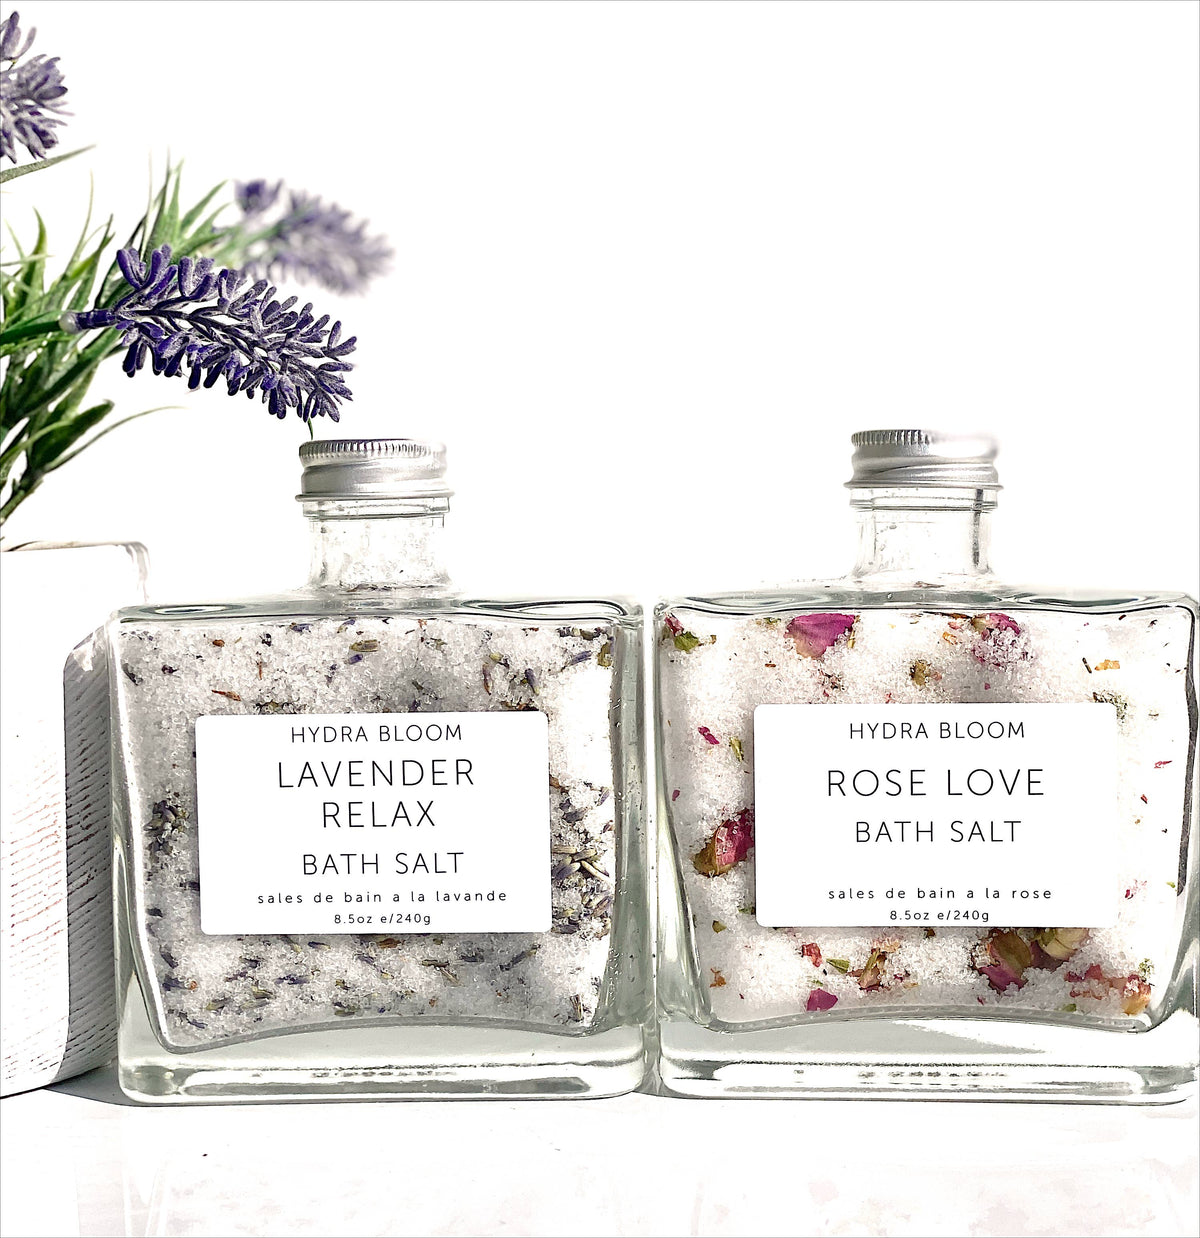 Two square glass bottles of Hydra Bloom Beauty Rose Love Bath Salts labeled "lavender relax" and "rose Epsom salt," filled with scented salts and visible botanical pieces, set against a white background.